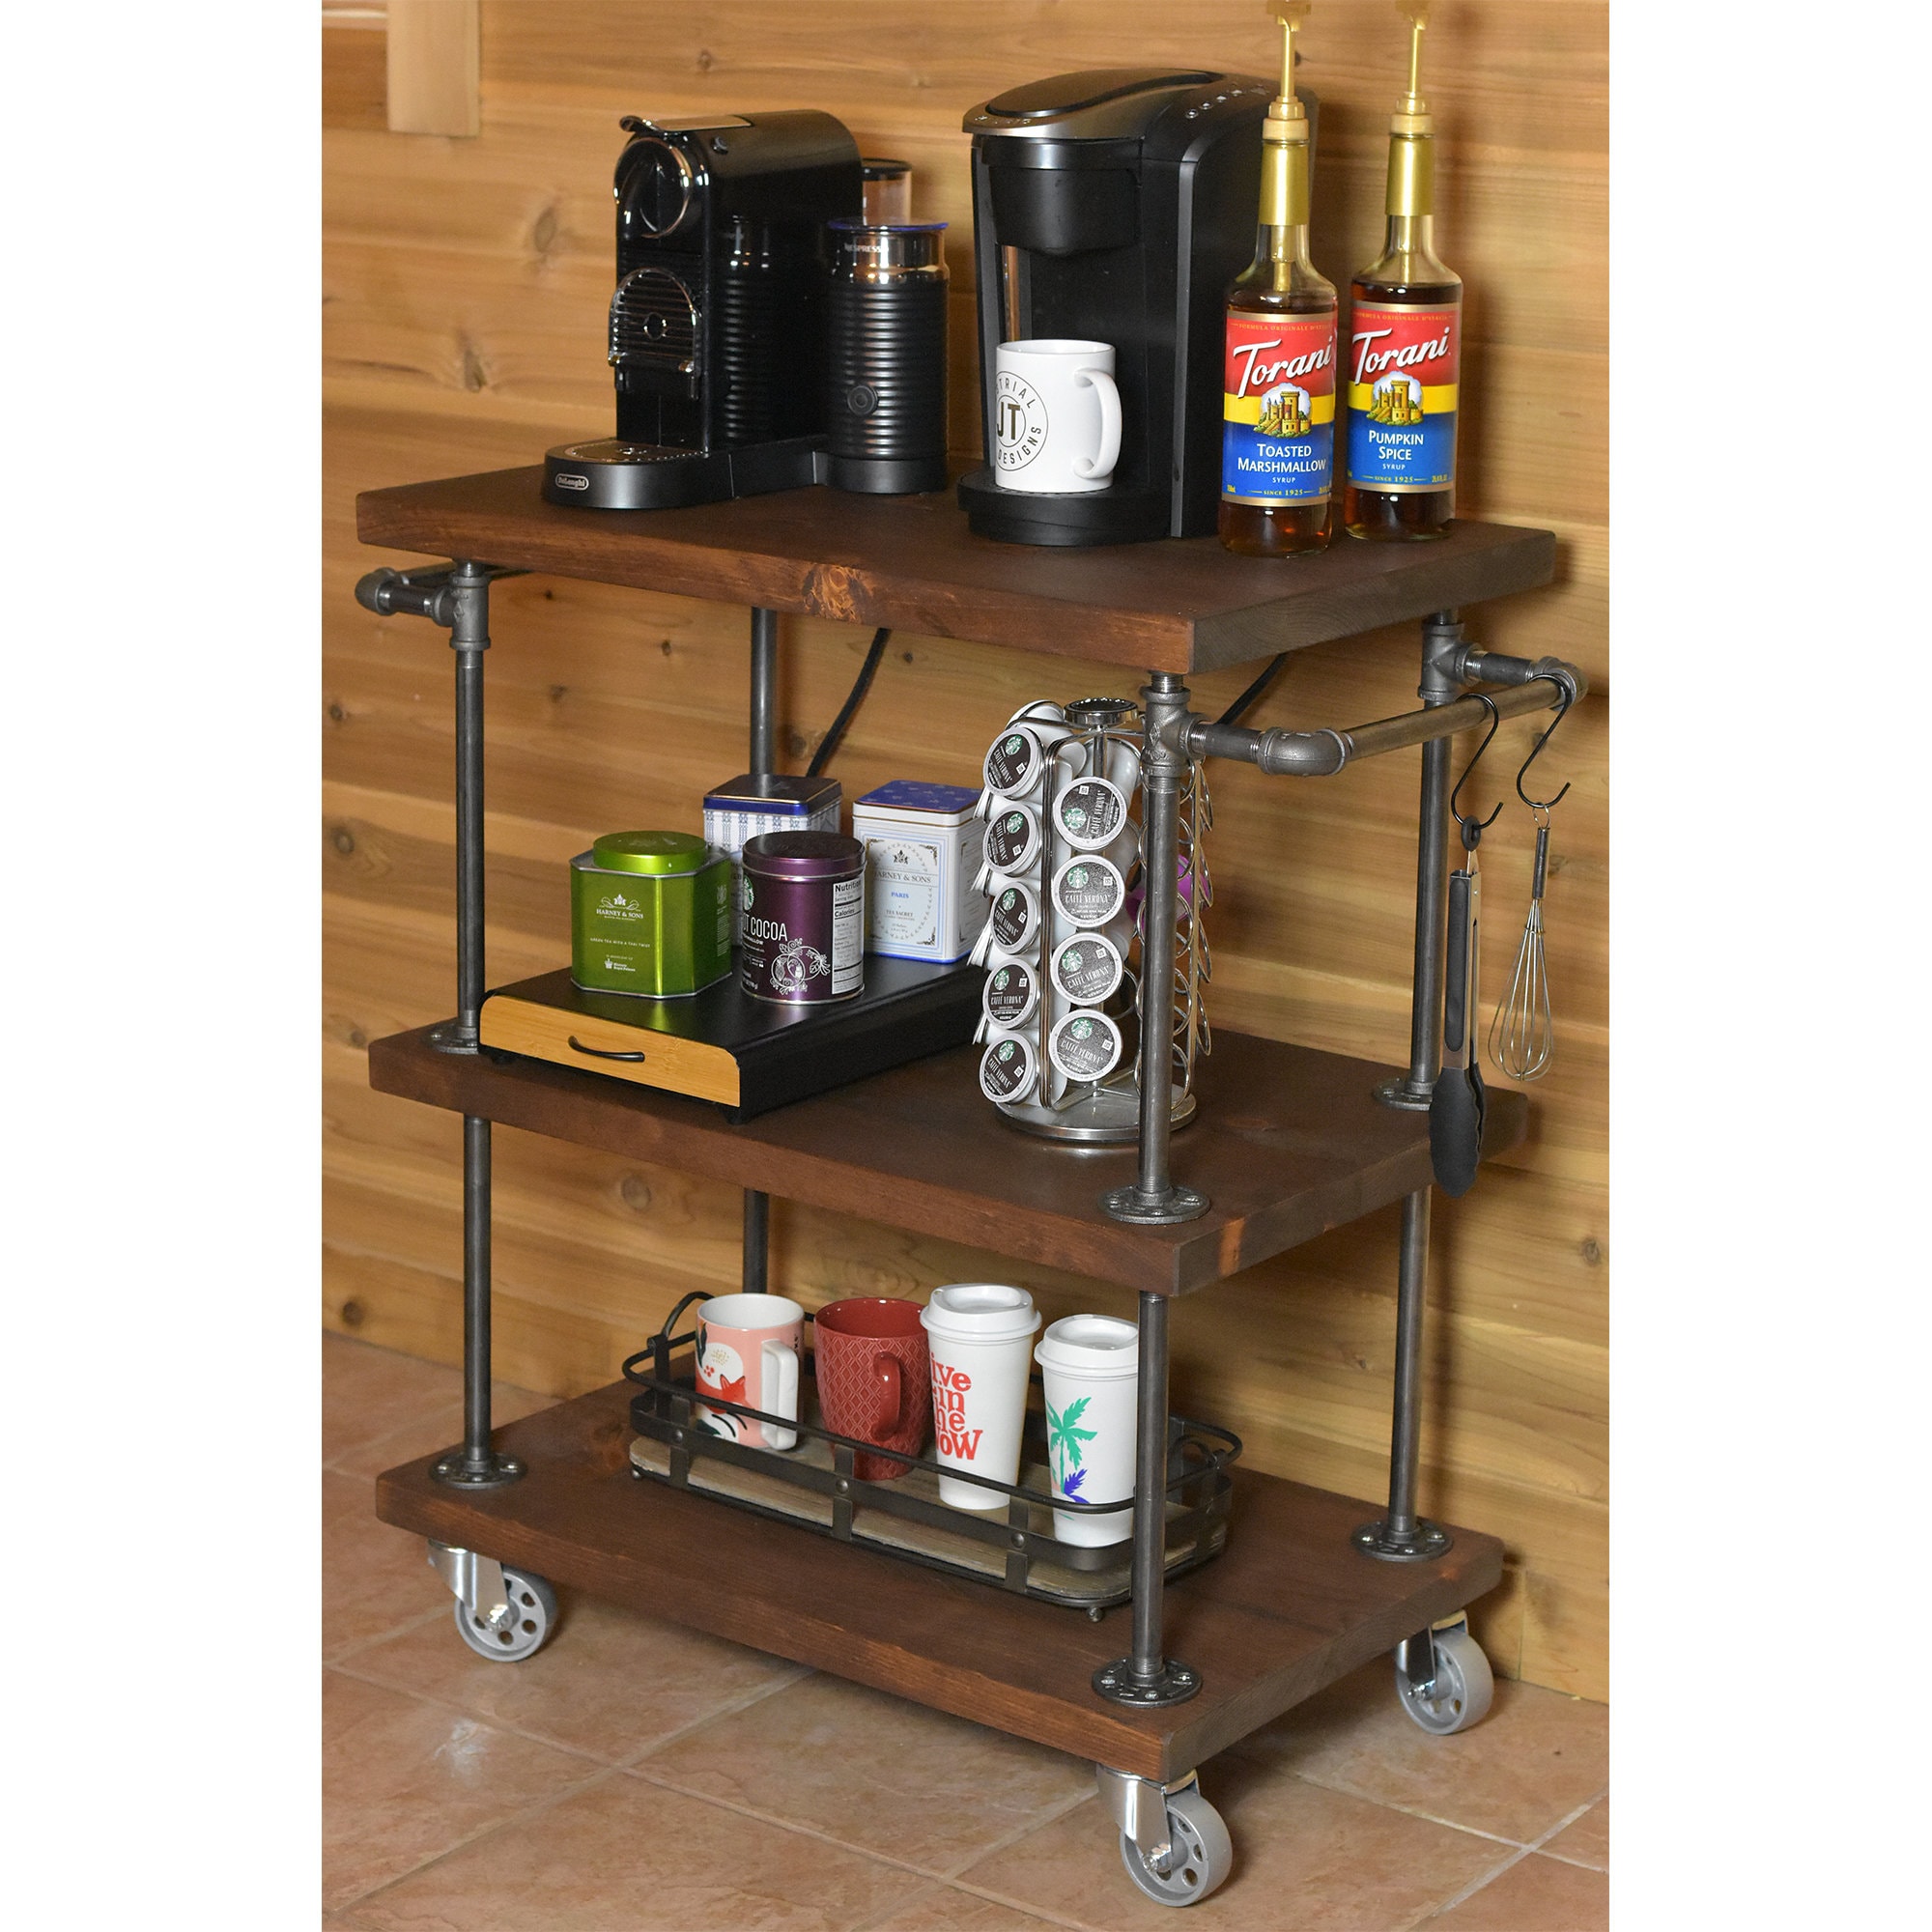 Mobile Coffee Cart Trolley Service Bar Cart Trolley Storage Accessories  Dining Room Sets Carrinho Auxiliar Hotel Furniture SQC